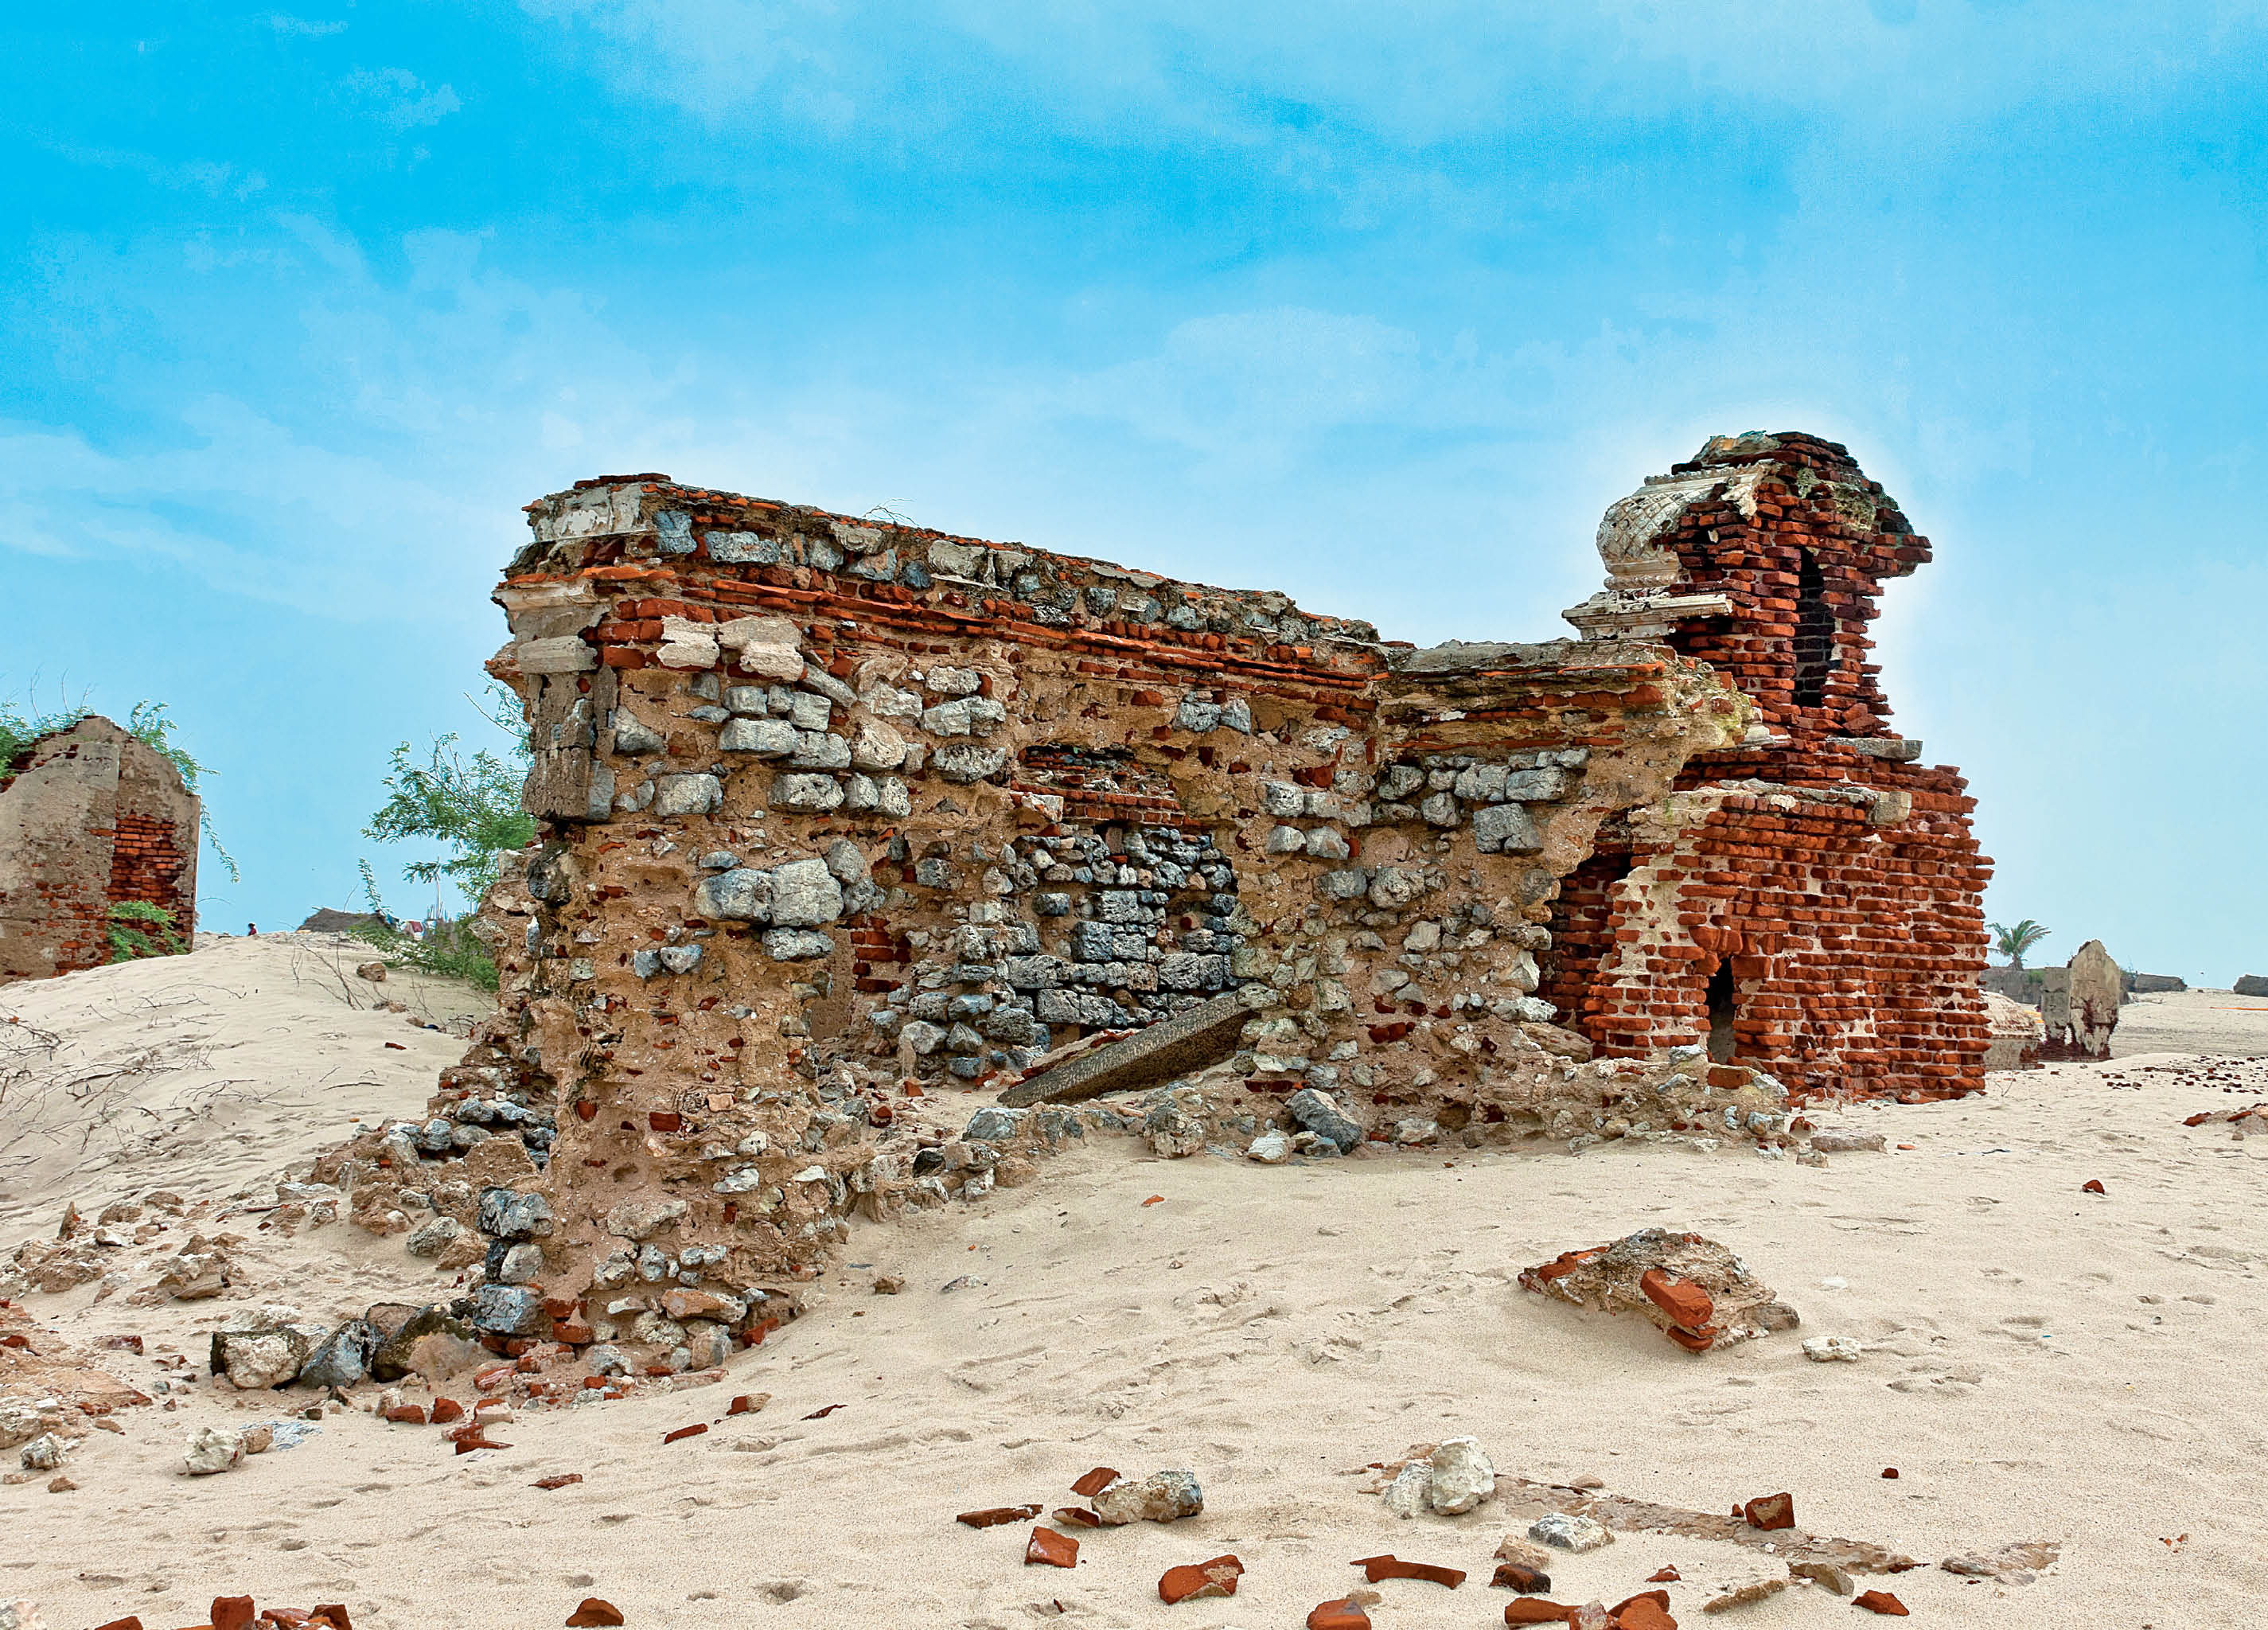 Dhanushkodi: A Disaster that Wiped out India’s Geography